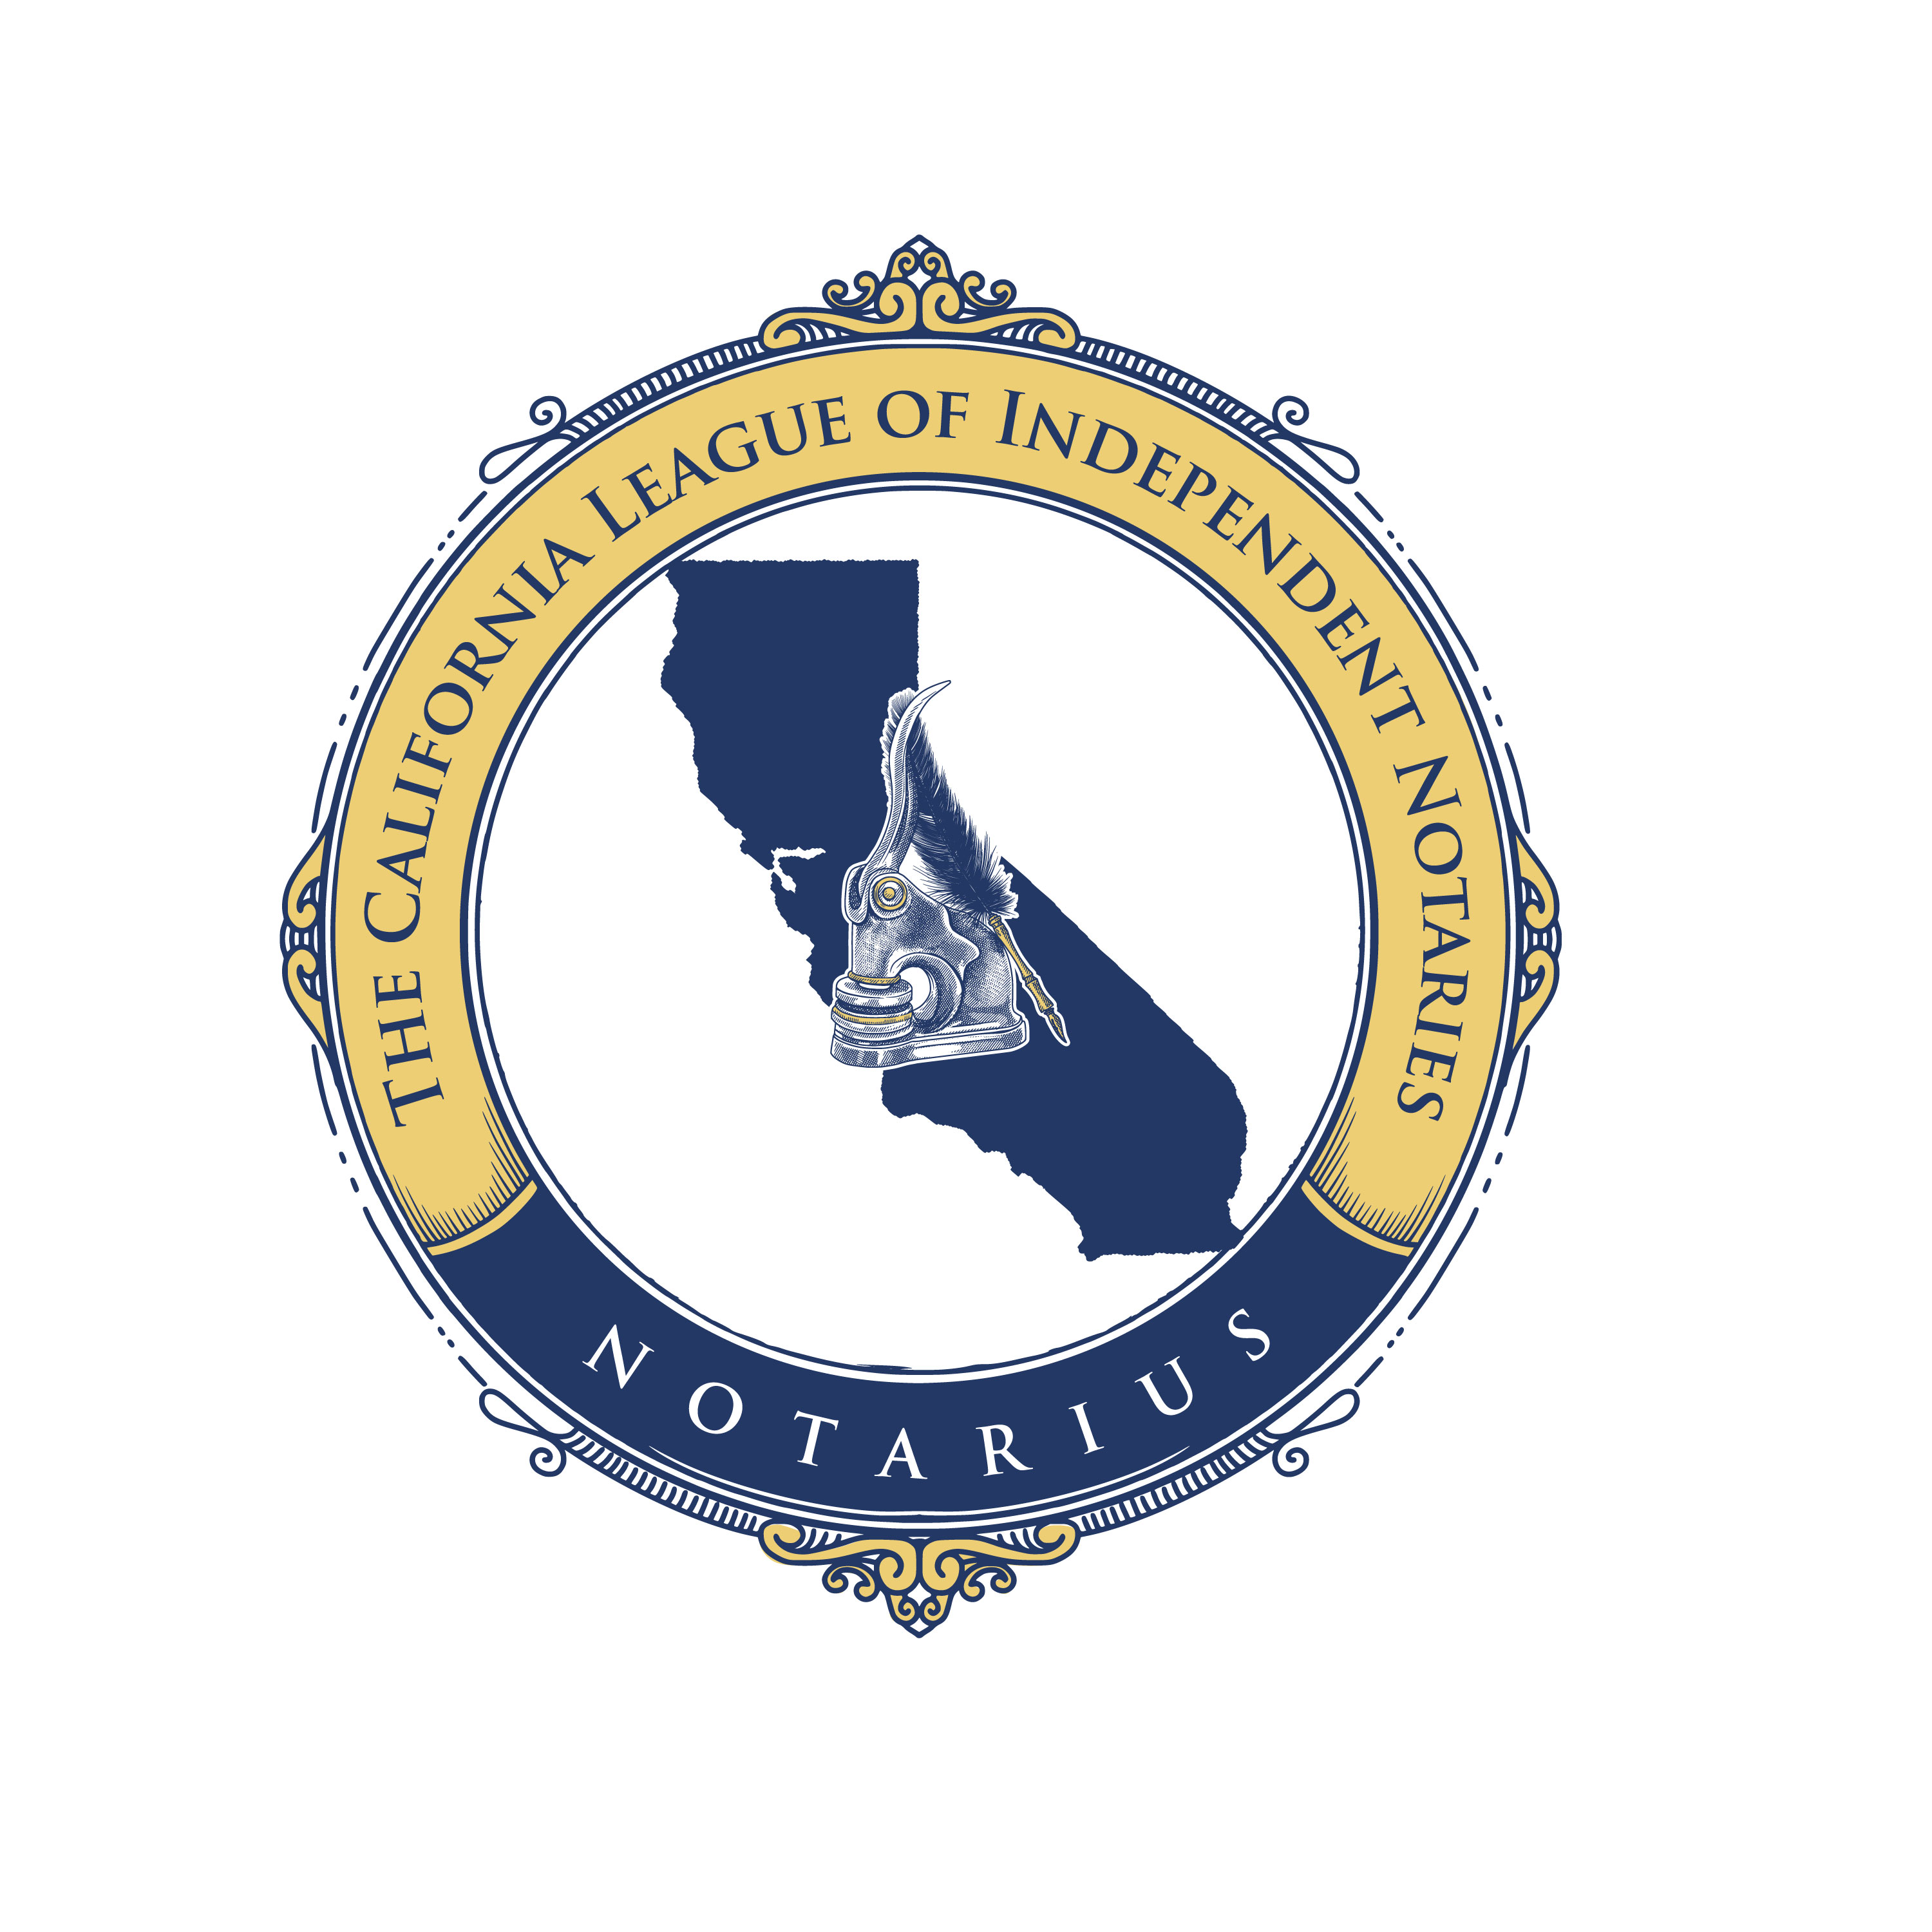 The California League of Independent Notaries Opposes the SECURE